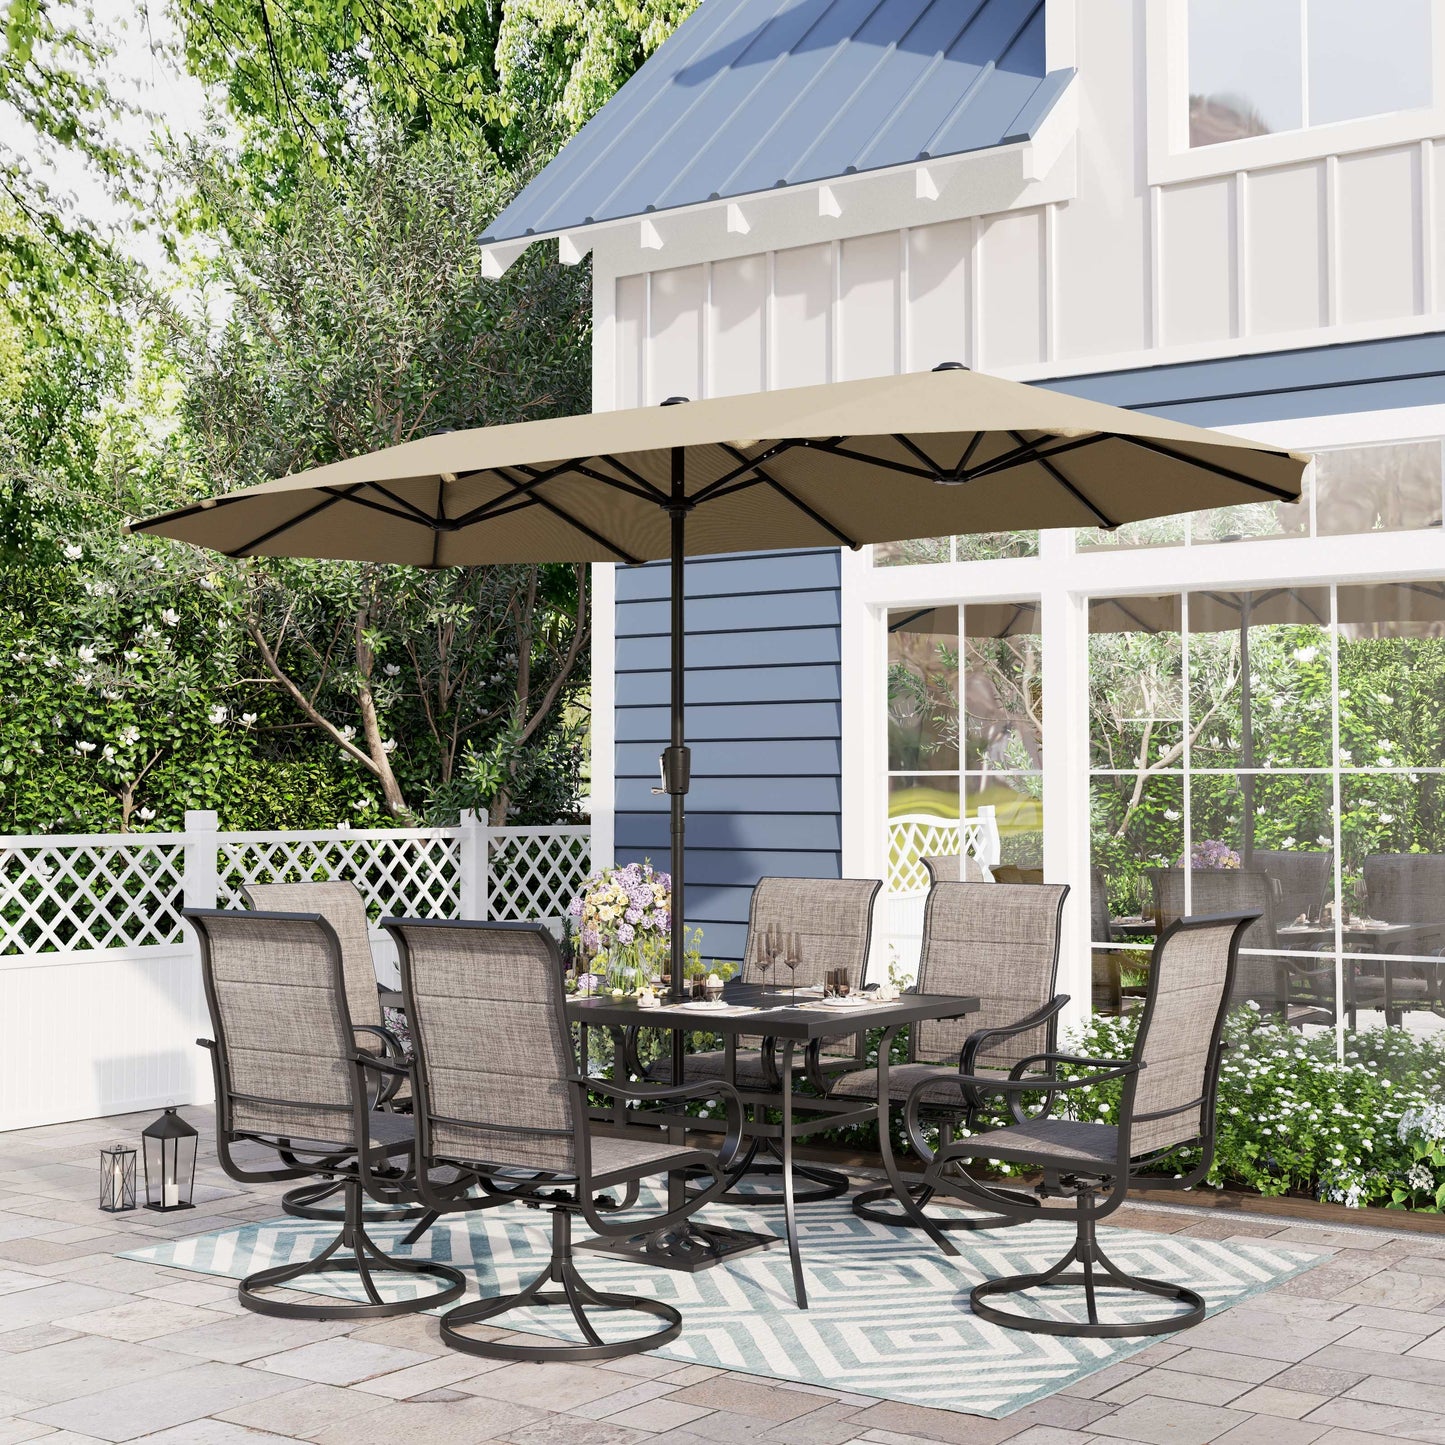 Sophia & William 8-Piece Outdoor Patio Dining Set with 13 ft Beige Umbrella, Rectangle Table & Textilene Chairs for 6